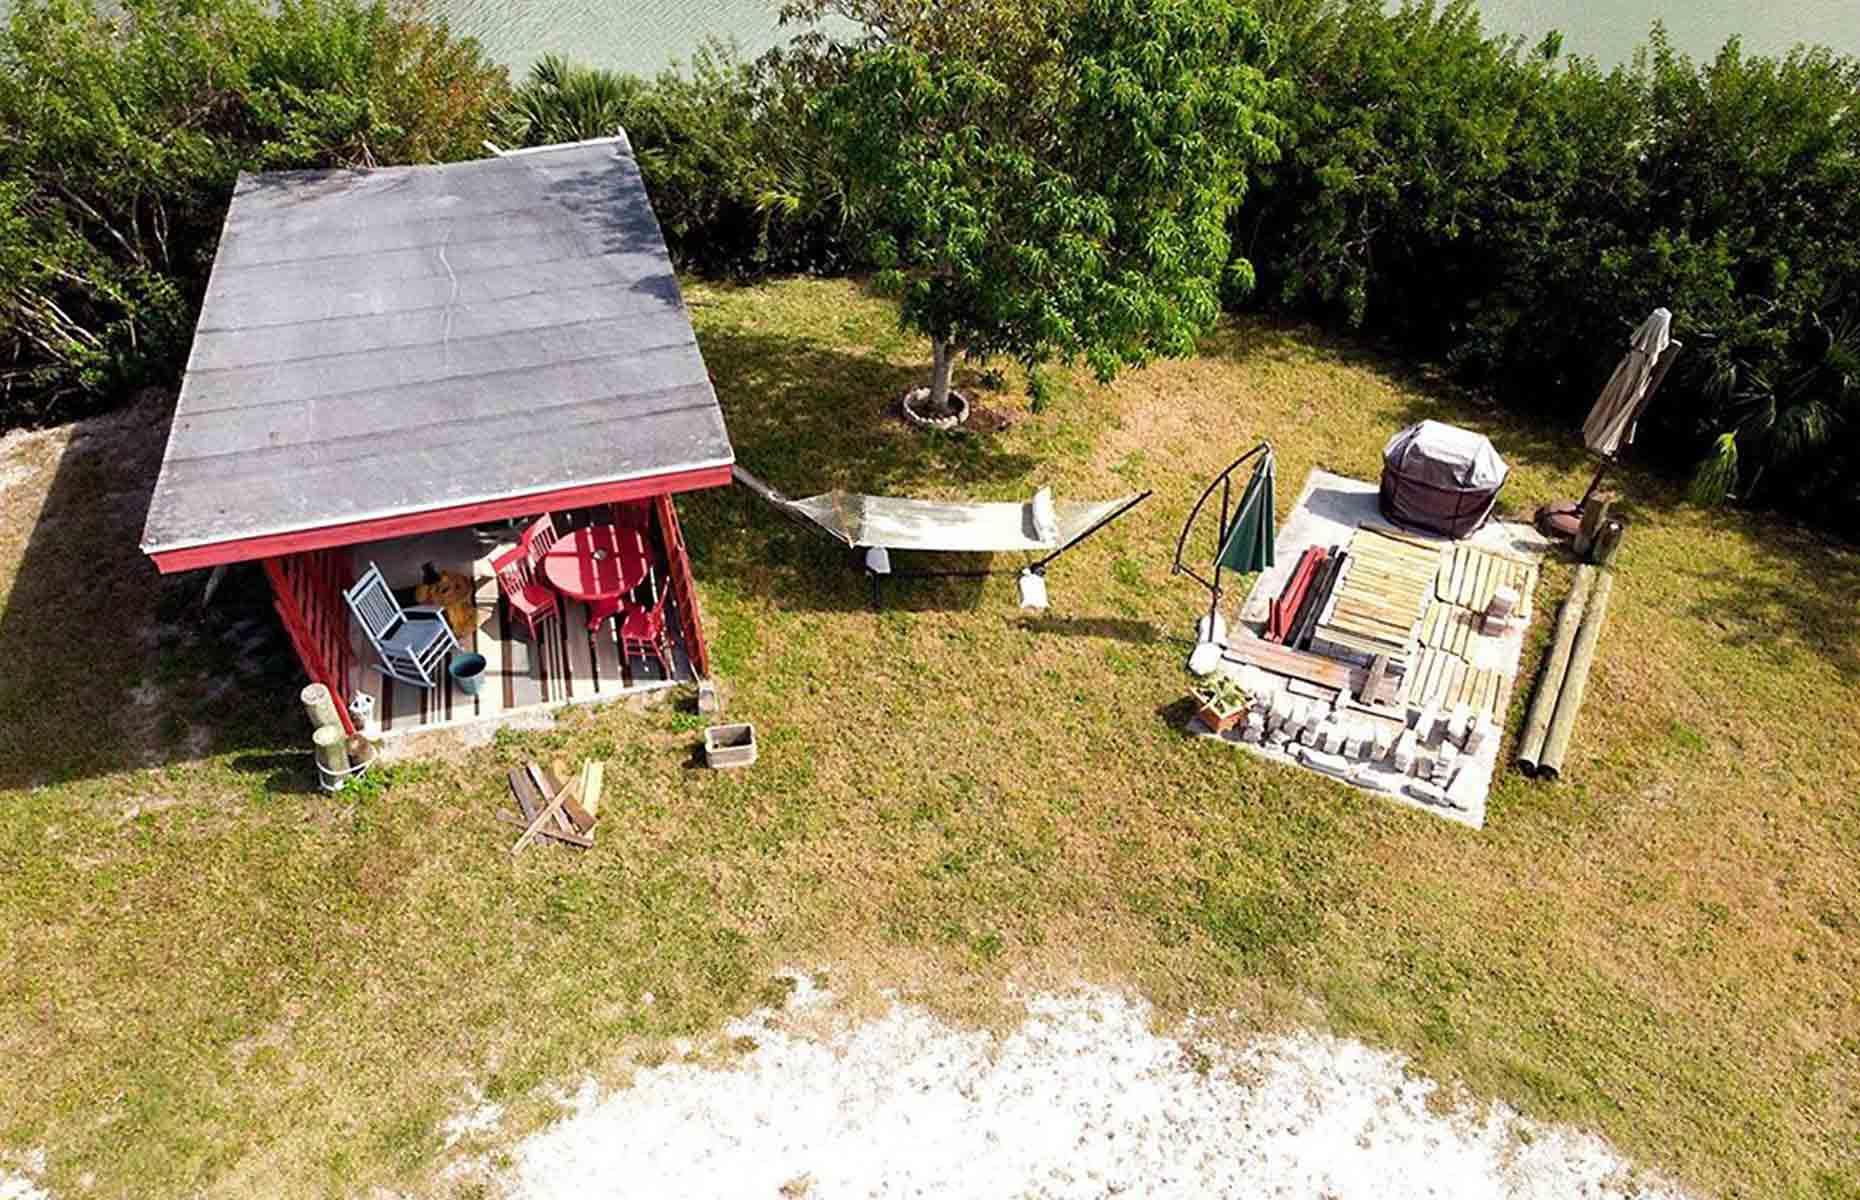 <p>When they purchased the property, Shellmate Island was home to a rundown storage shed and a dilapidated boat port. After completing their new tiny house and moving Tiffany to the island in June 2020, Tim and Sam decided it was time to give the rickety port a facelift.</p>  <p>“I figured out how to add structural support to it, sealed the roof, painted it, added a door and a couple of beams, added siding and mosquito nets", says Tim. Given a new lease of life, it's now a stylish outdoor living area for the couple and their friends and family <span>–</span> talk about a bargain backyard makeover!</p>